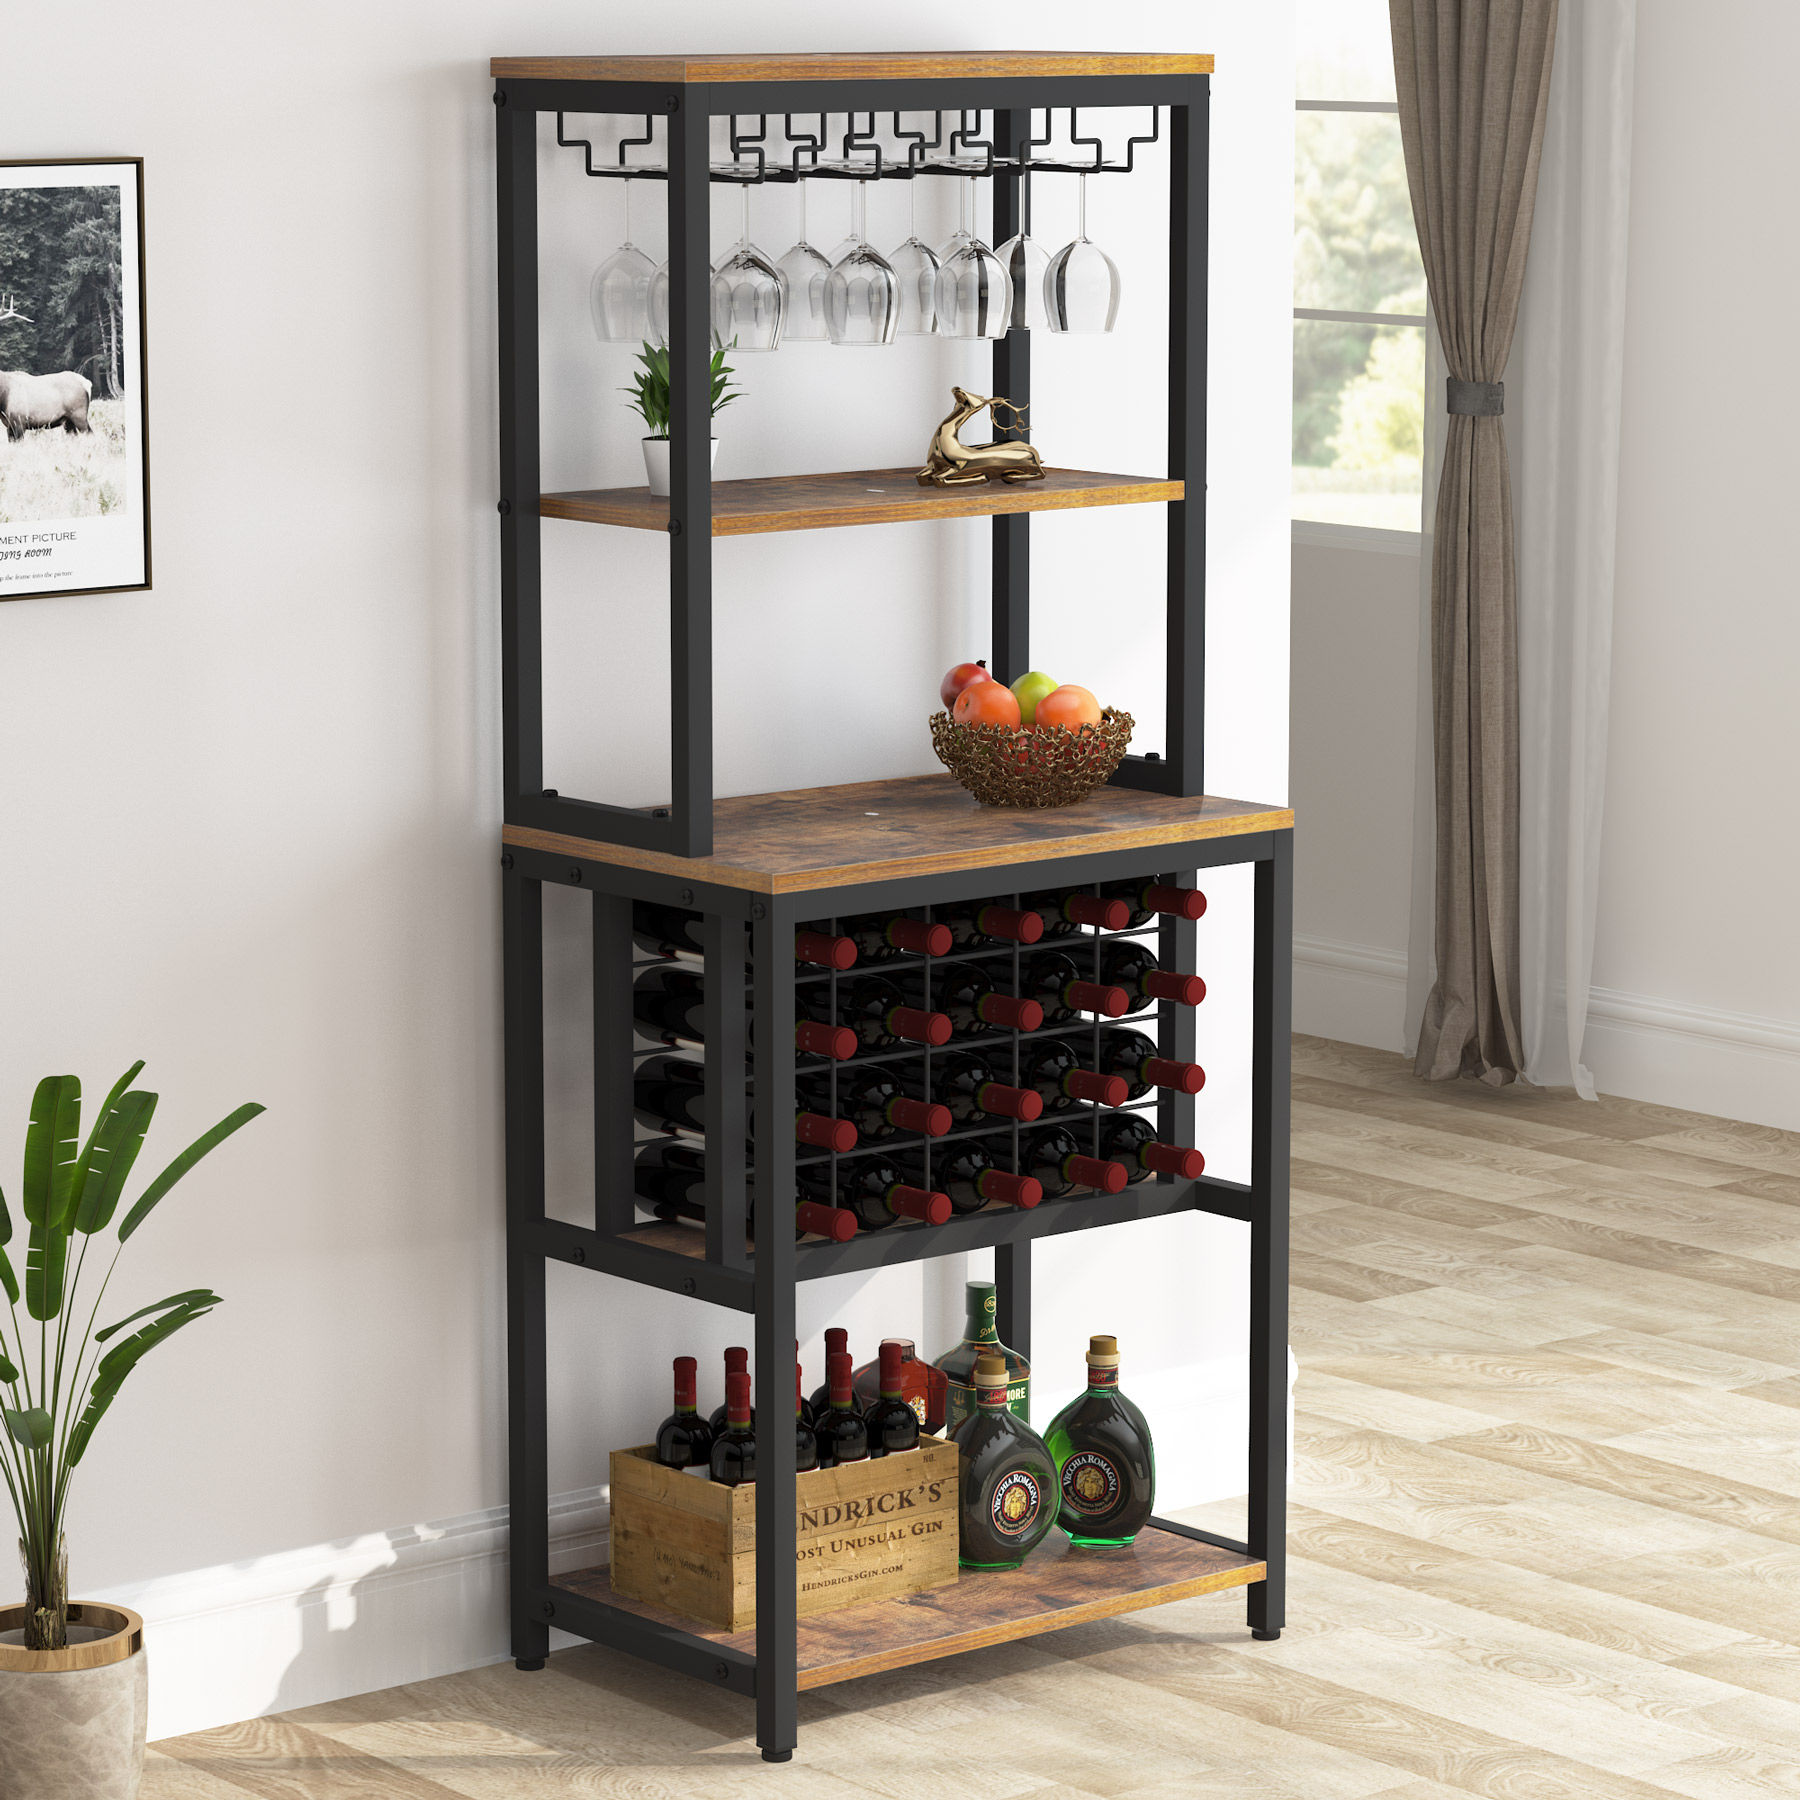 Storage Cabinets 3 Shelves and a 15 Wine Glass Rack with a Modern Dark Weathered Oak Finish TUHOME Montenegro Collection Bar Cabinet//Home Bar Comes with a 5 Bottle Wine Rack